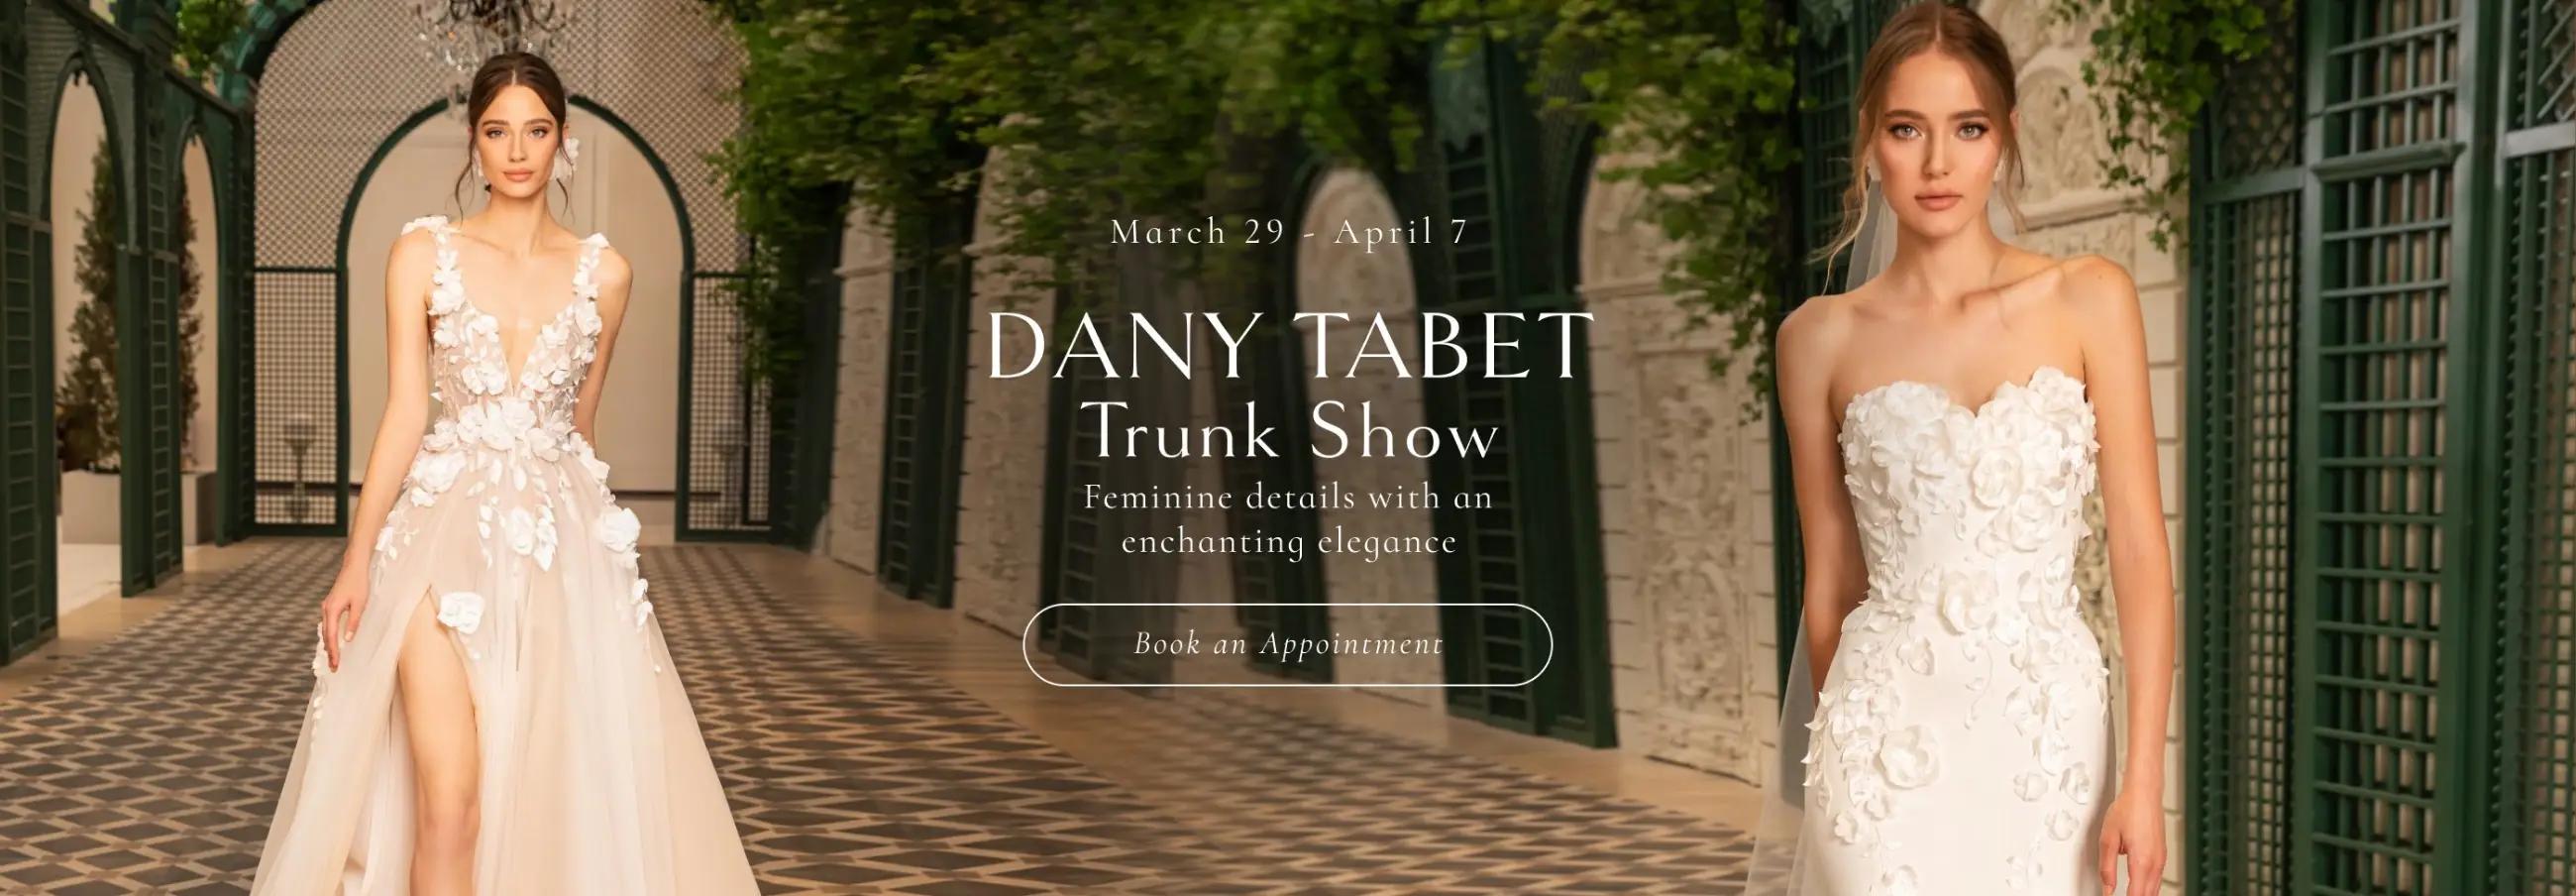 Dany Tabet Trunk Show at Solutions Bridal